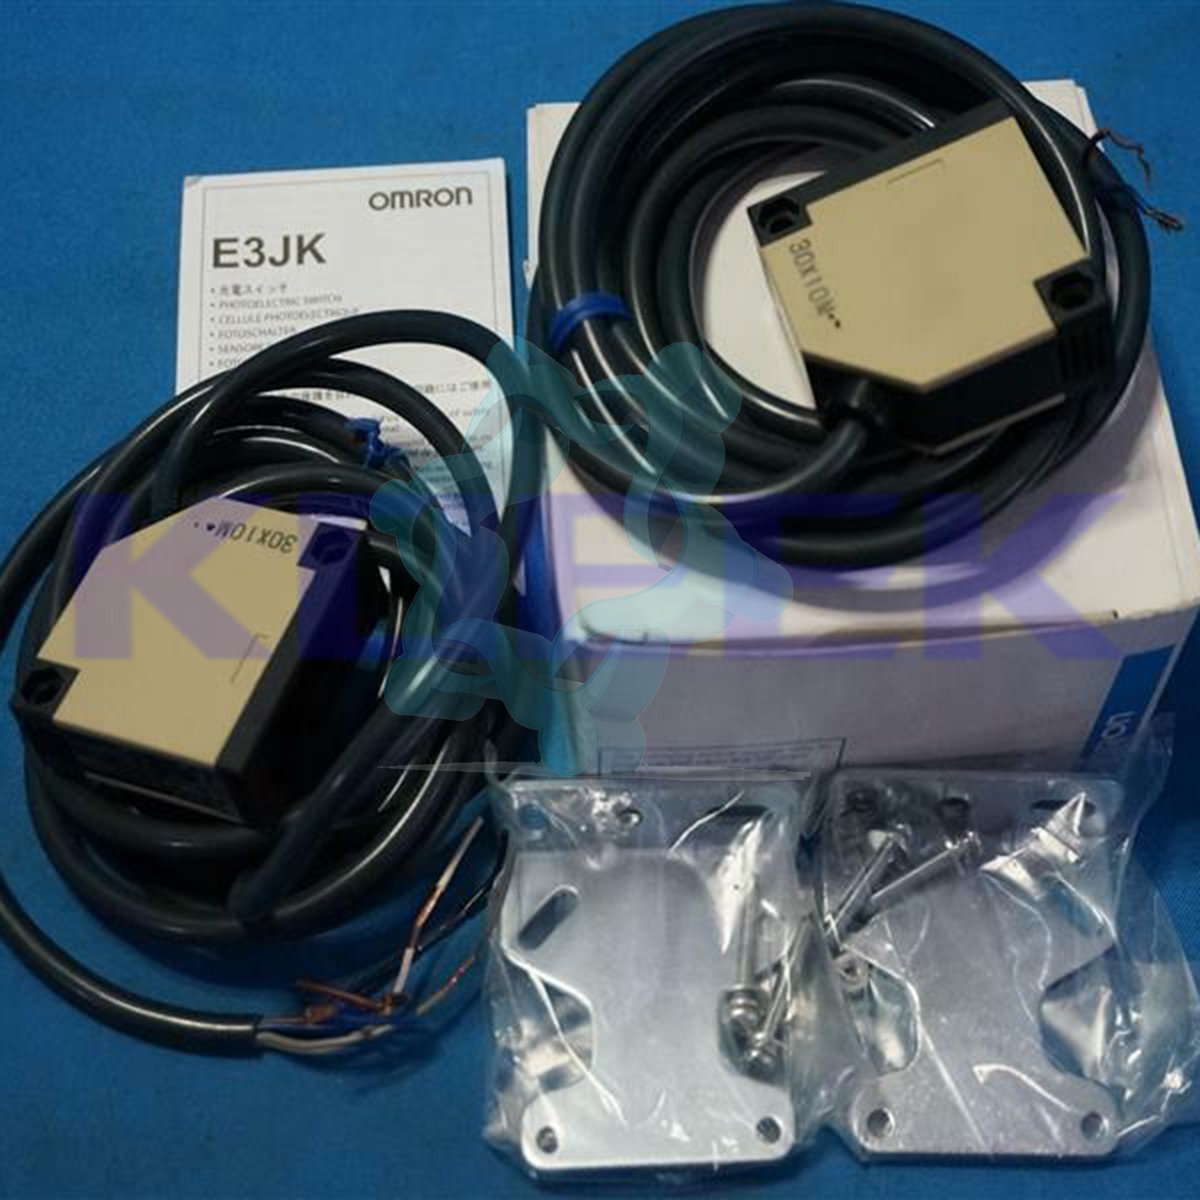 E3JK-5M1-N KOEED 1, 80%, import_2020_10_10_031751, Omron, Other